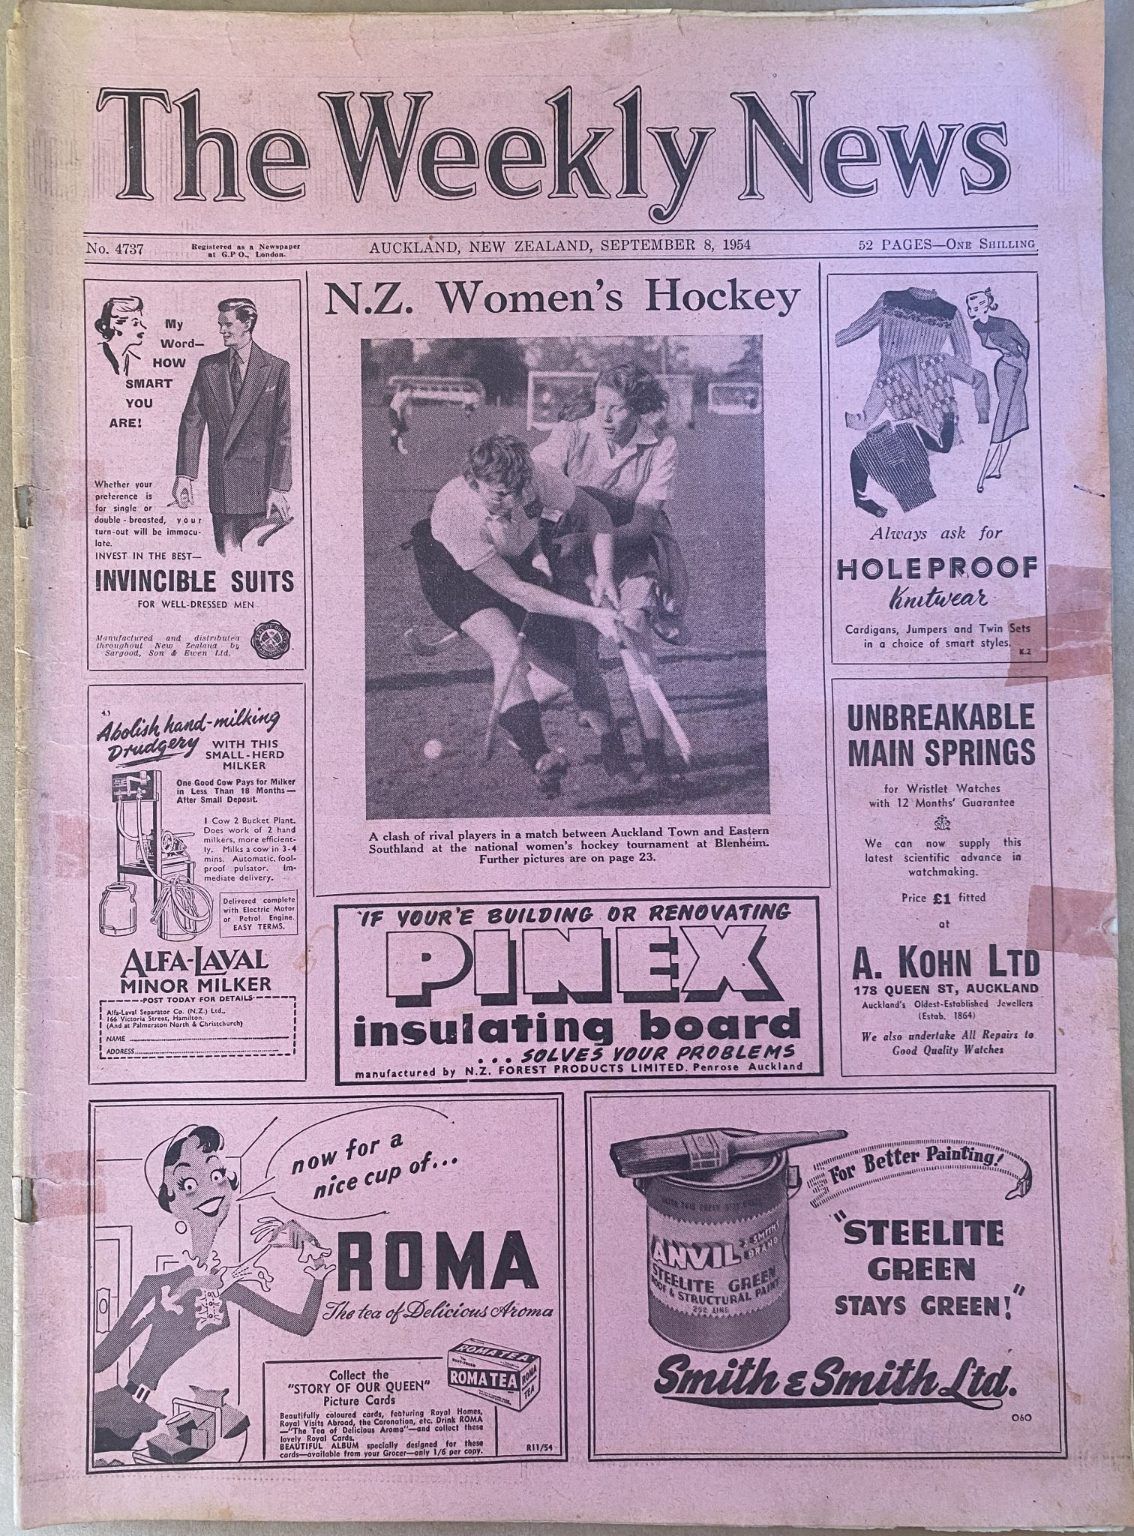 OLD NEWSPAPER: The Weekly News - No. 4737, 8 September 1954